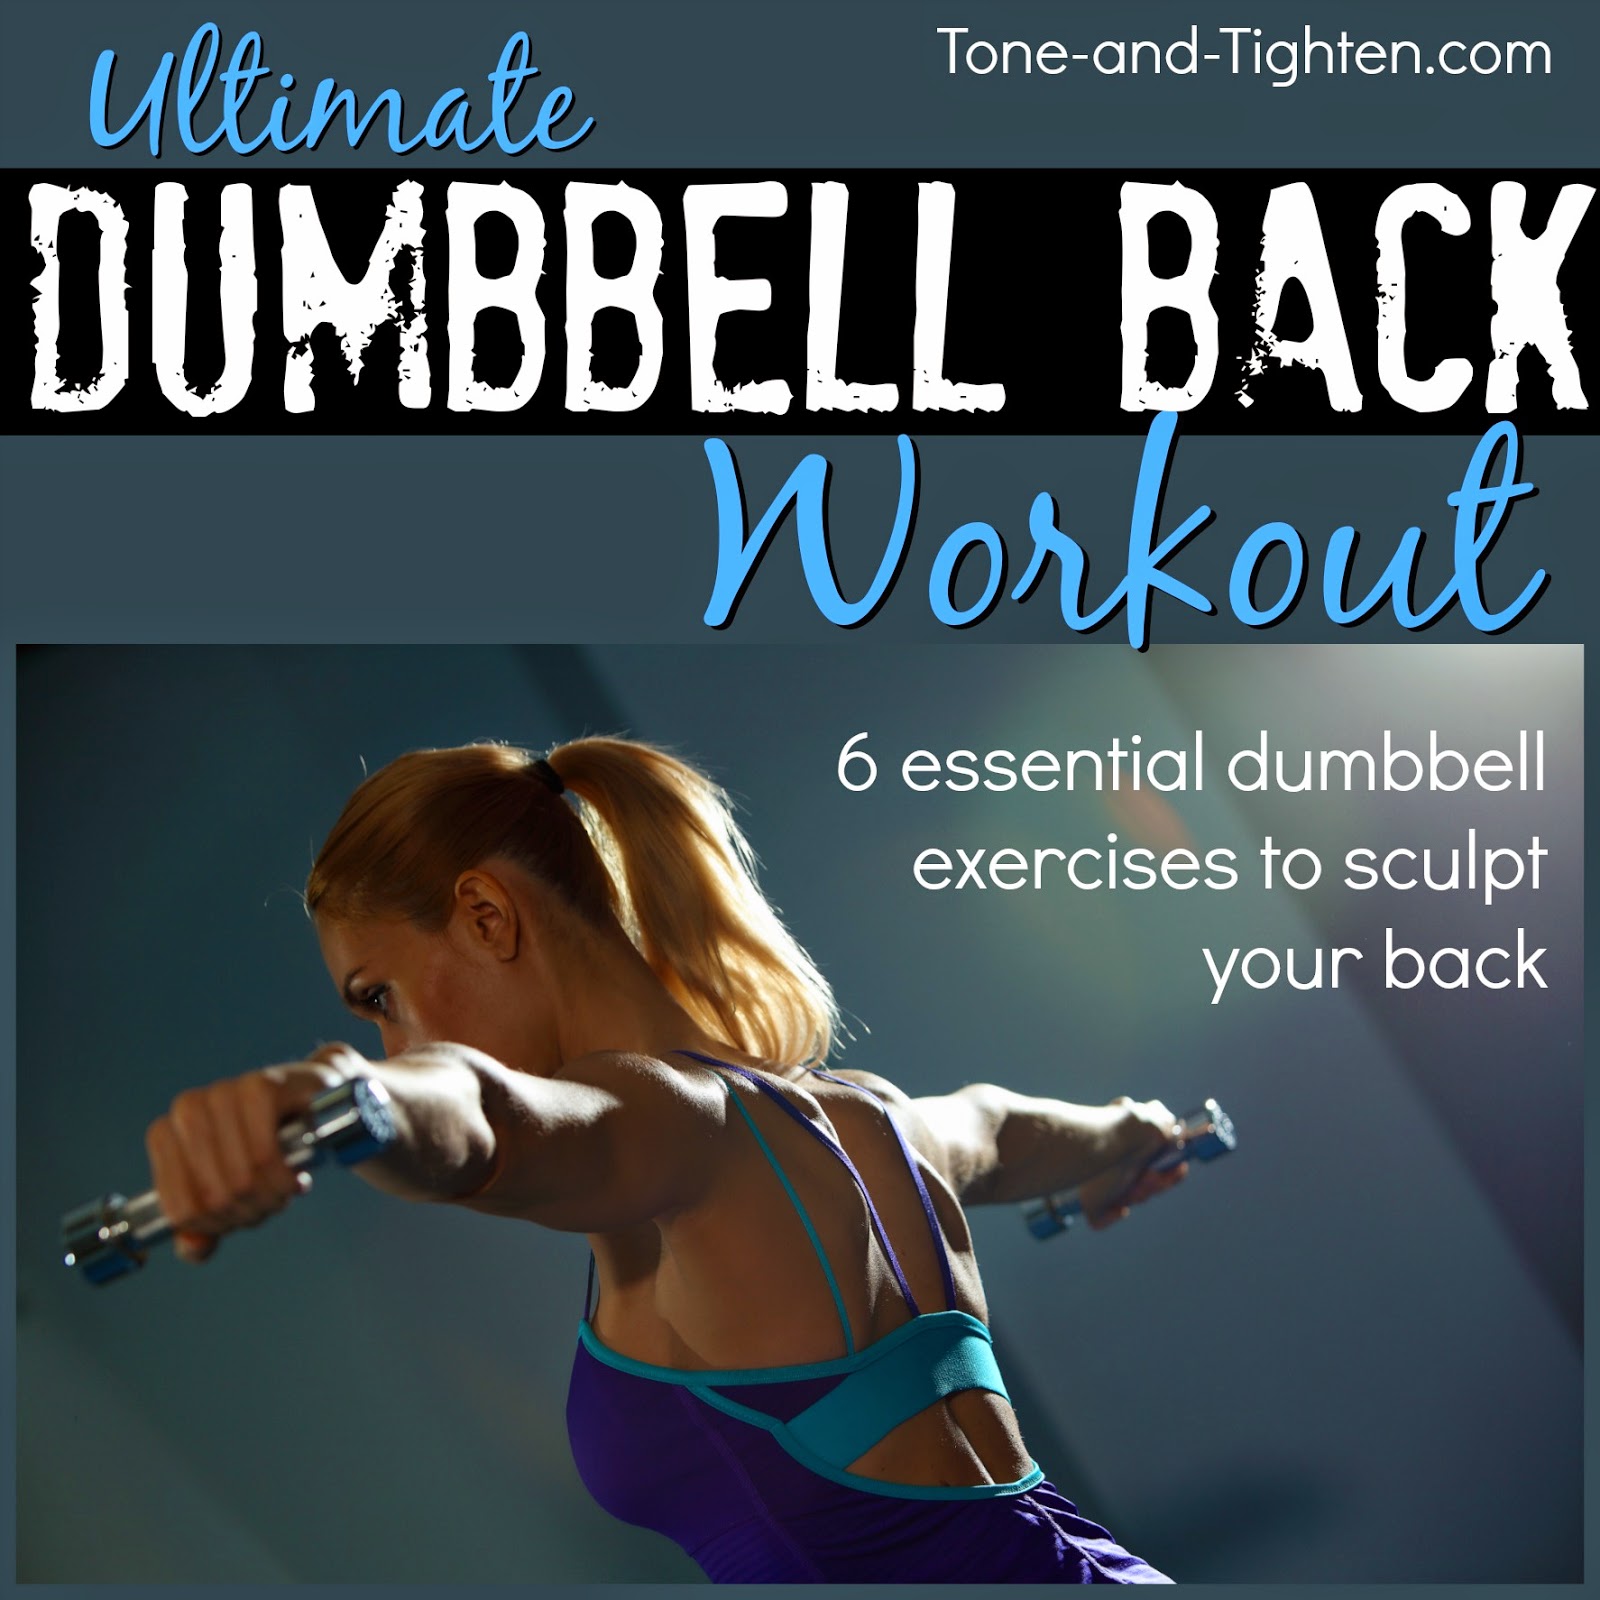  Back Workouts With Dumbbells And Barbells for Fat Body